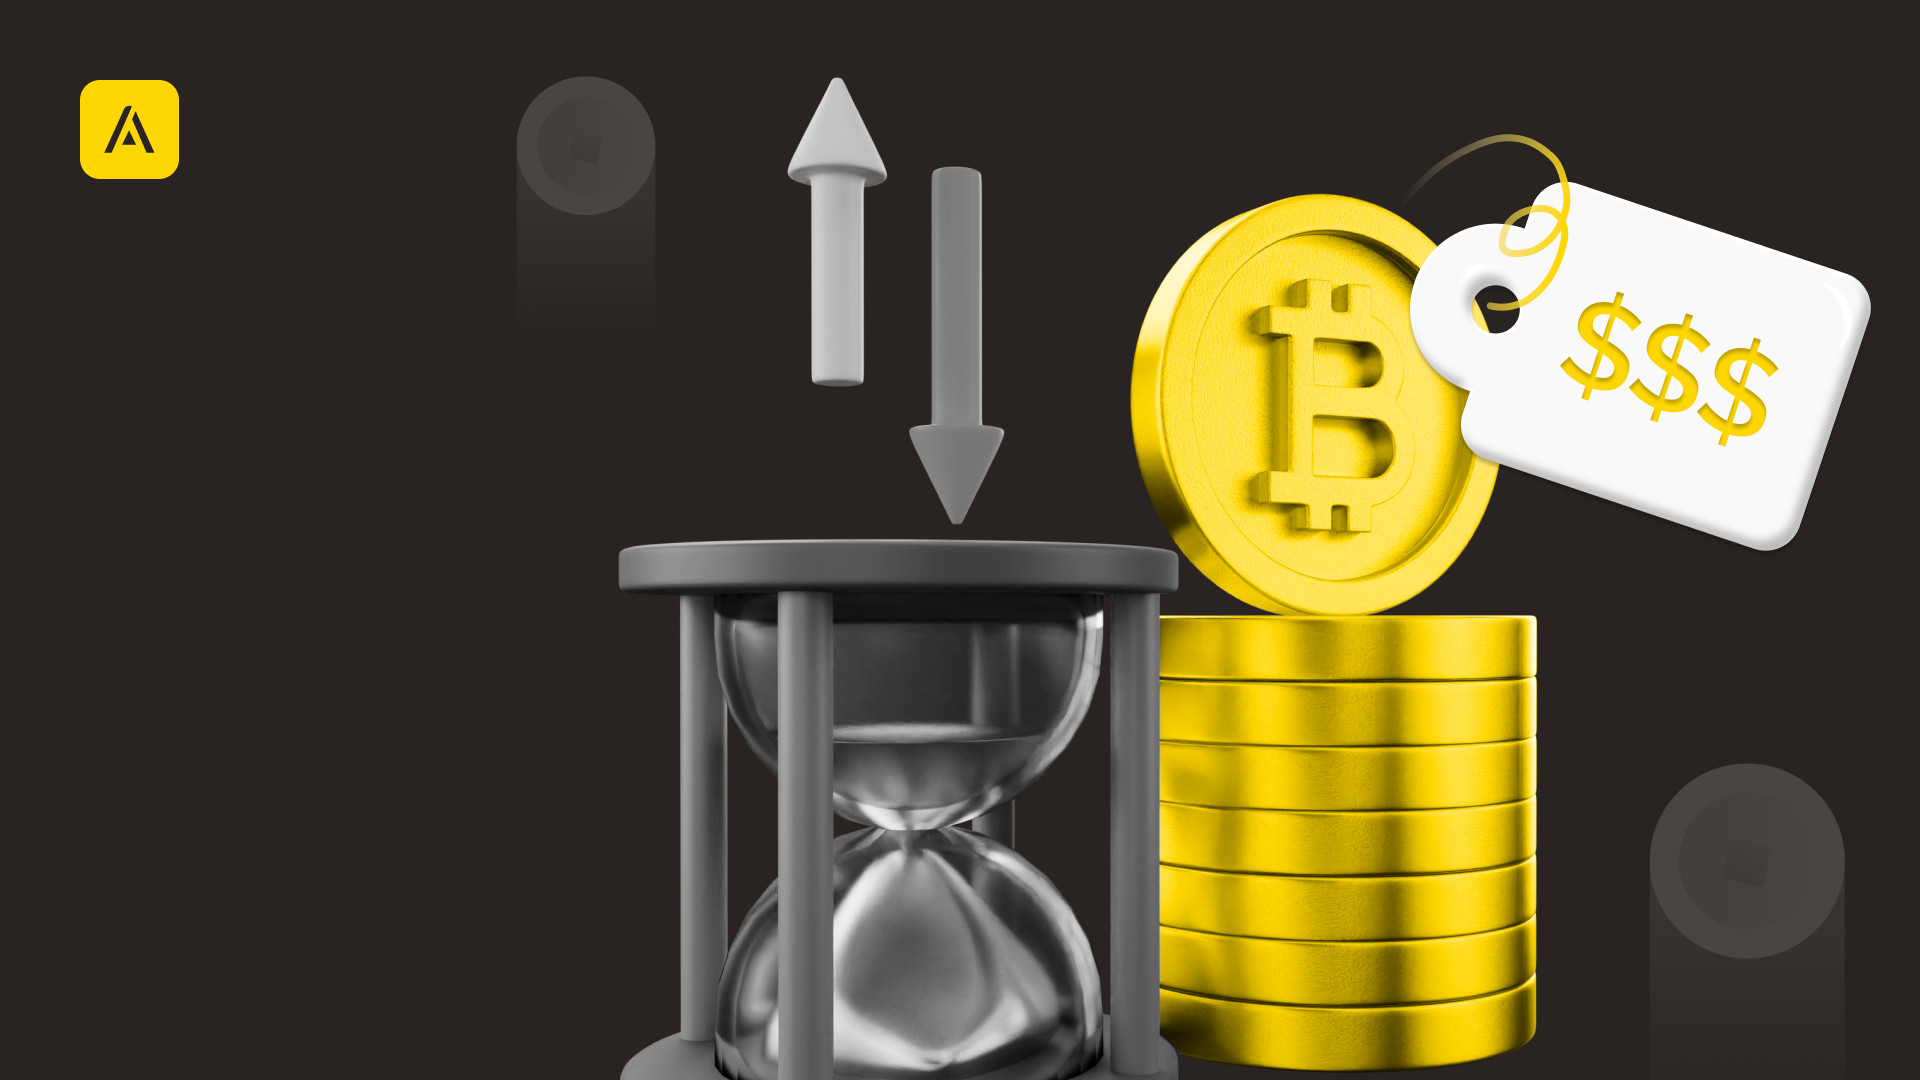 How much is 1 bitcoin and what are the prospects for its growth